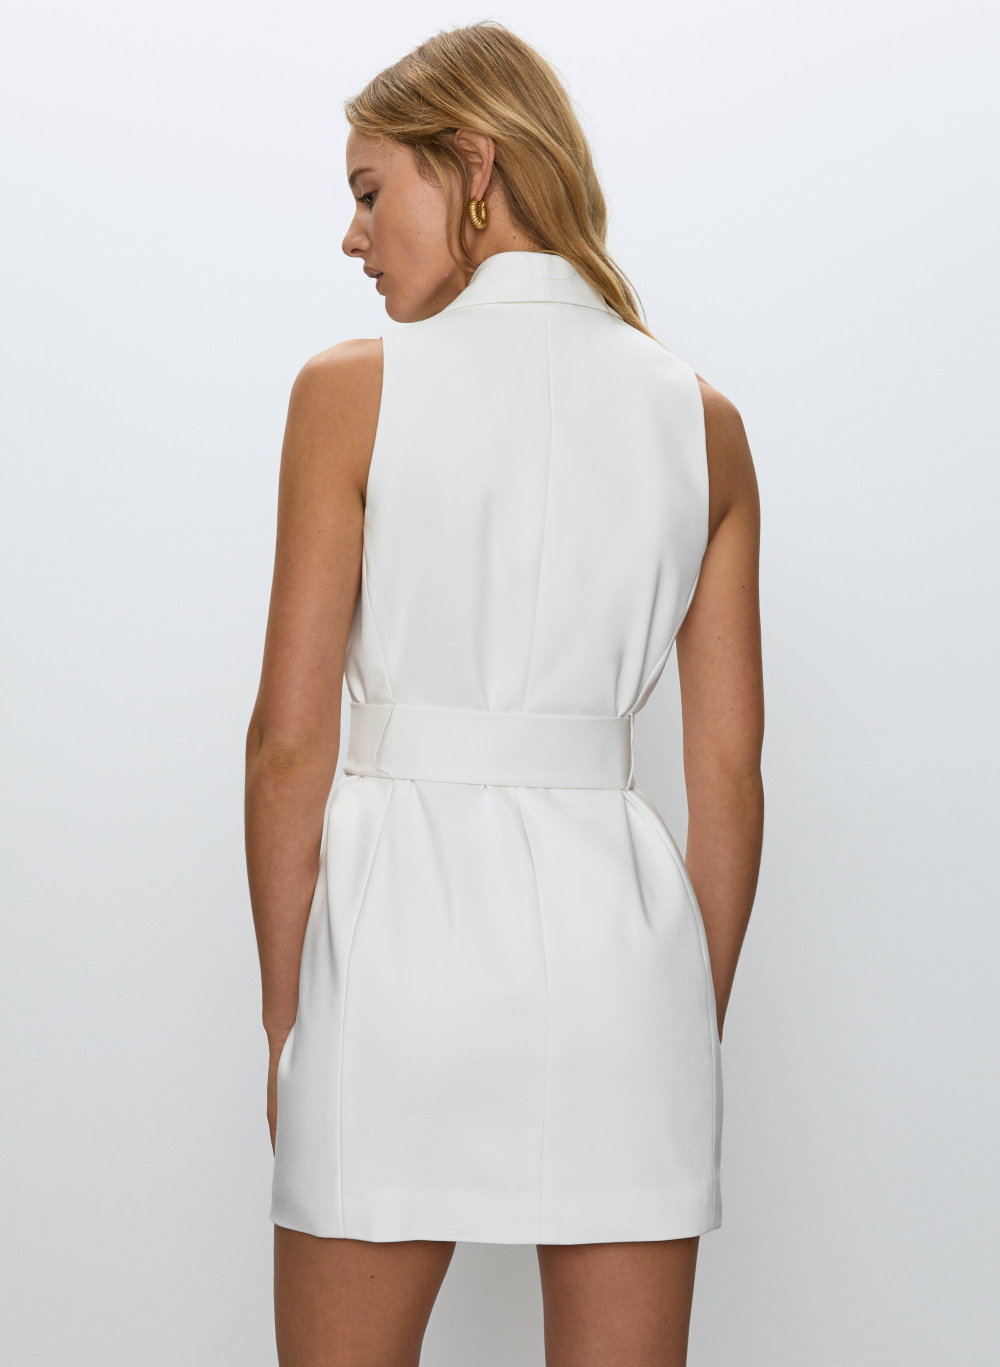 White Vest Dress Online Store, UP TO 50 ...